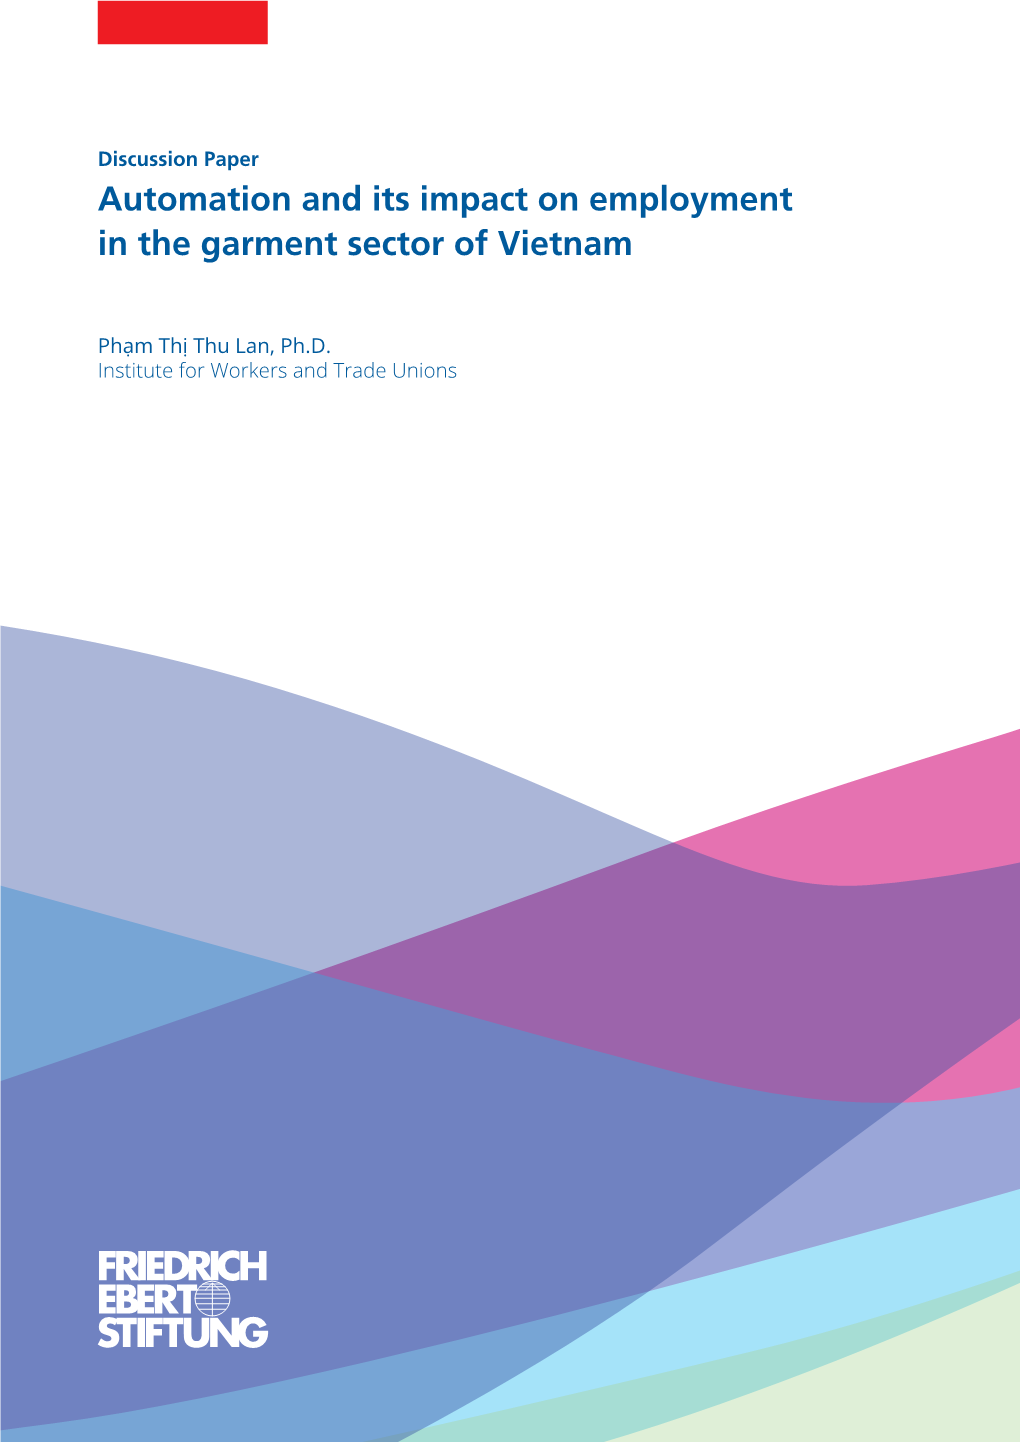 Automation and Its Impact on Employment in the Garment Sector of Vietnam